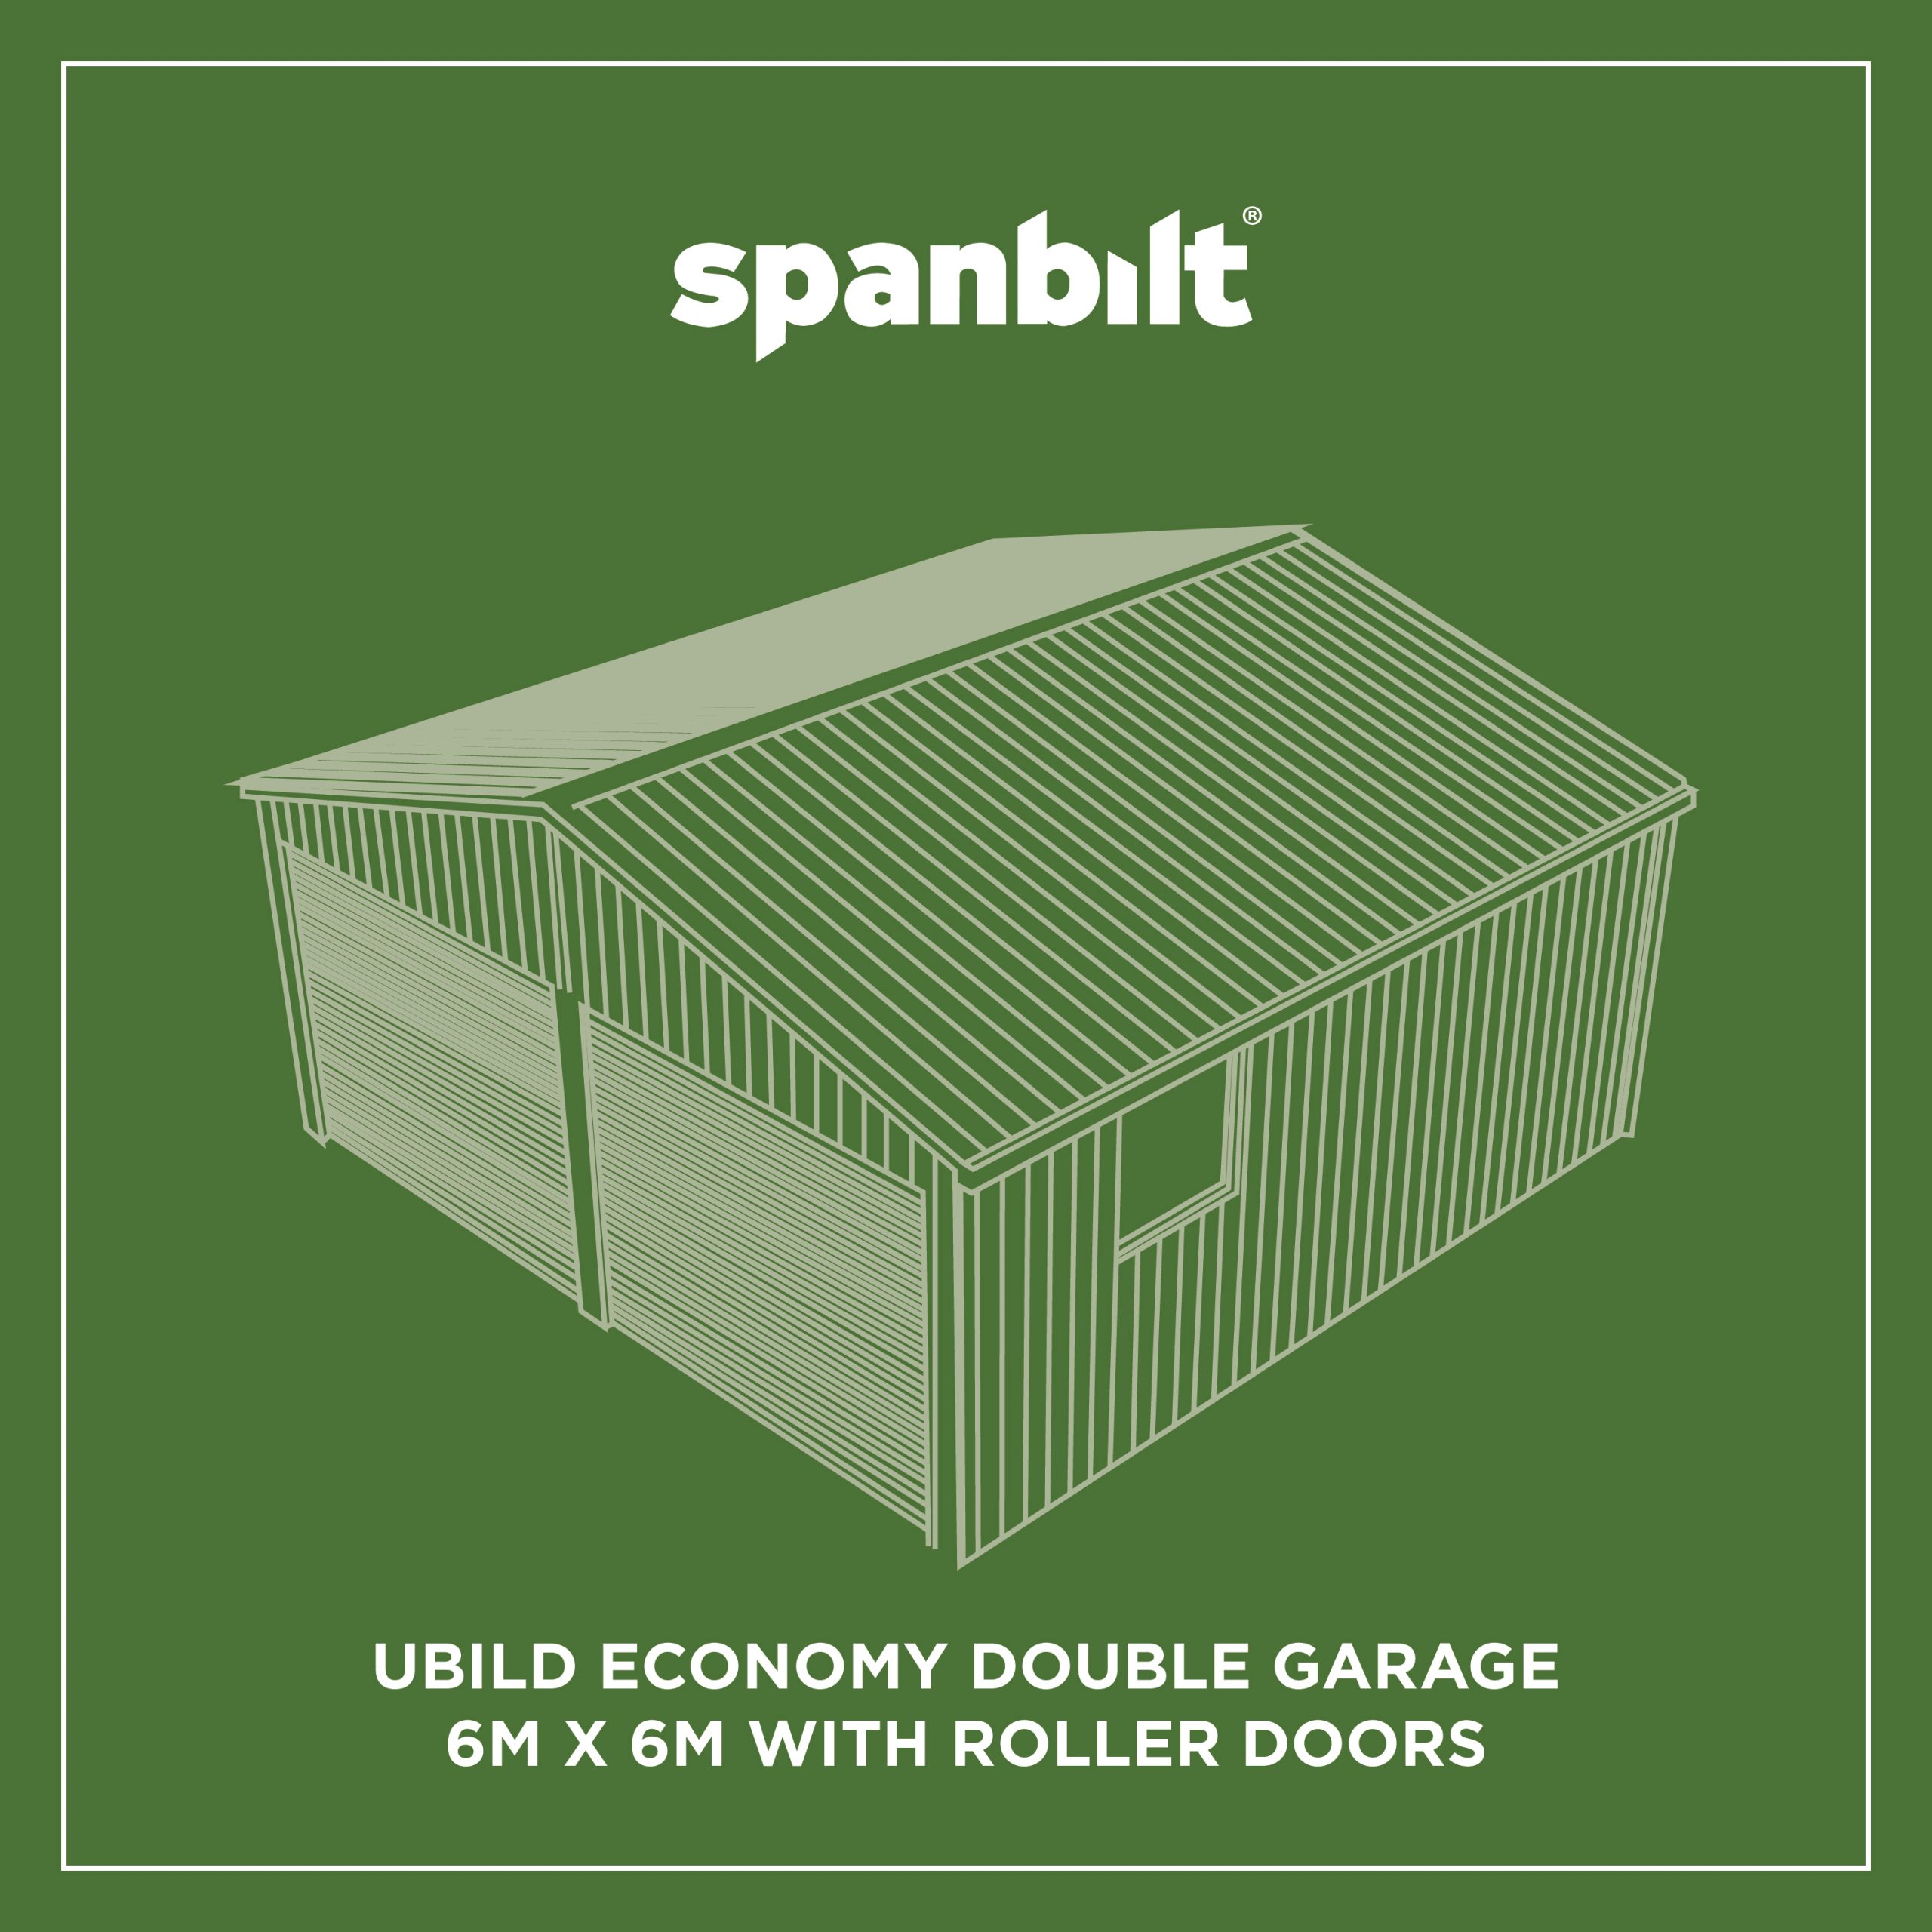 UBild Economy Double Garage 6m x 6m with Roller Doors - ENGINEERING PAPERS ONLY